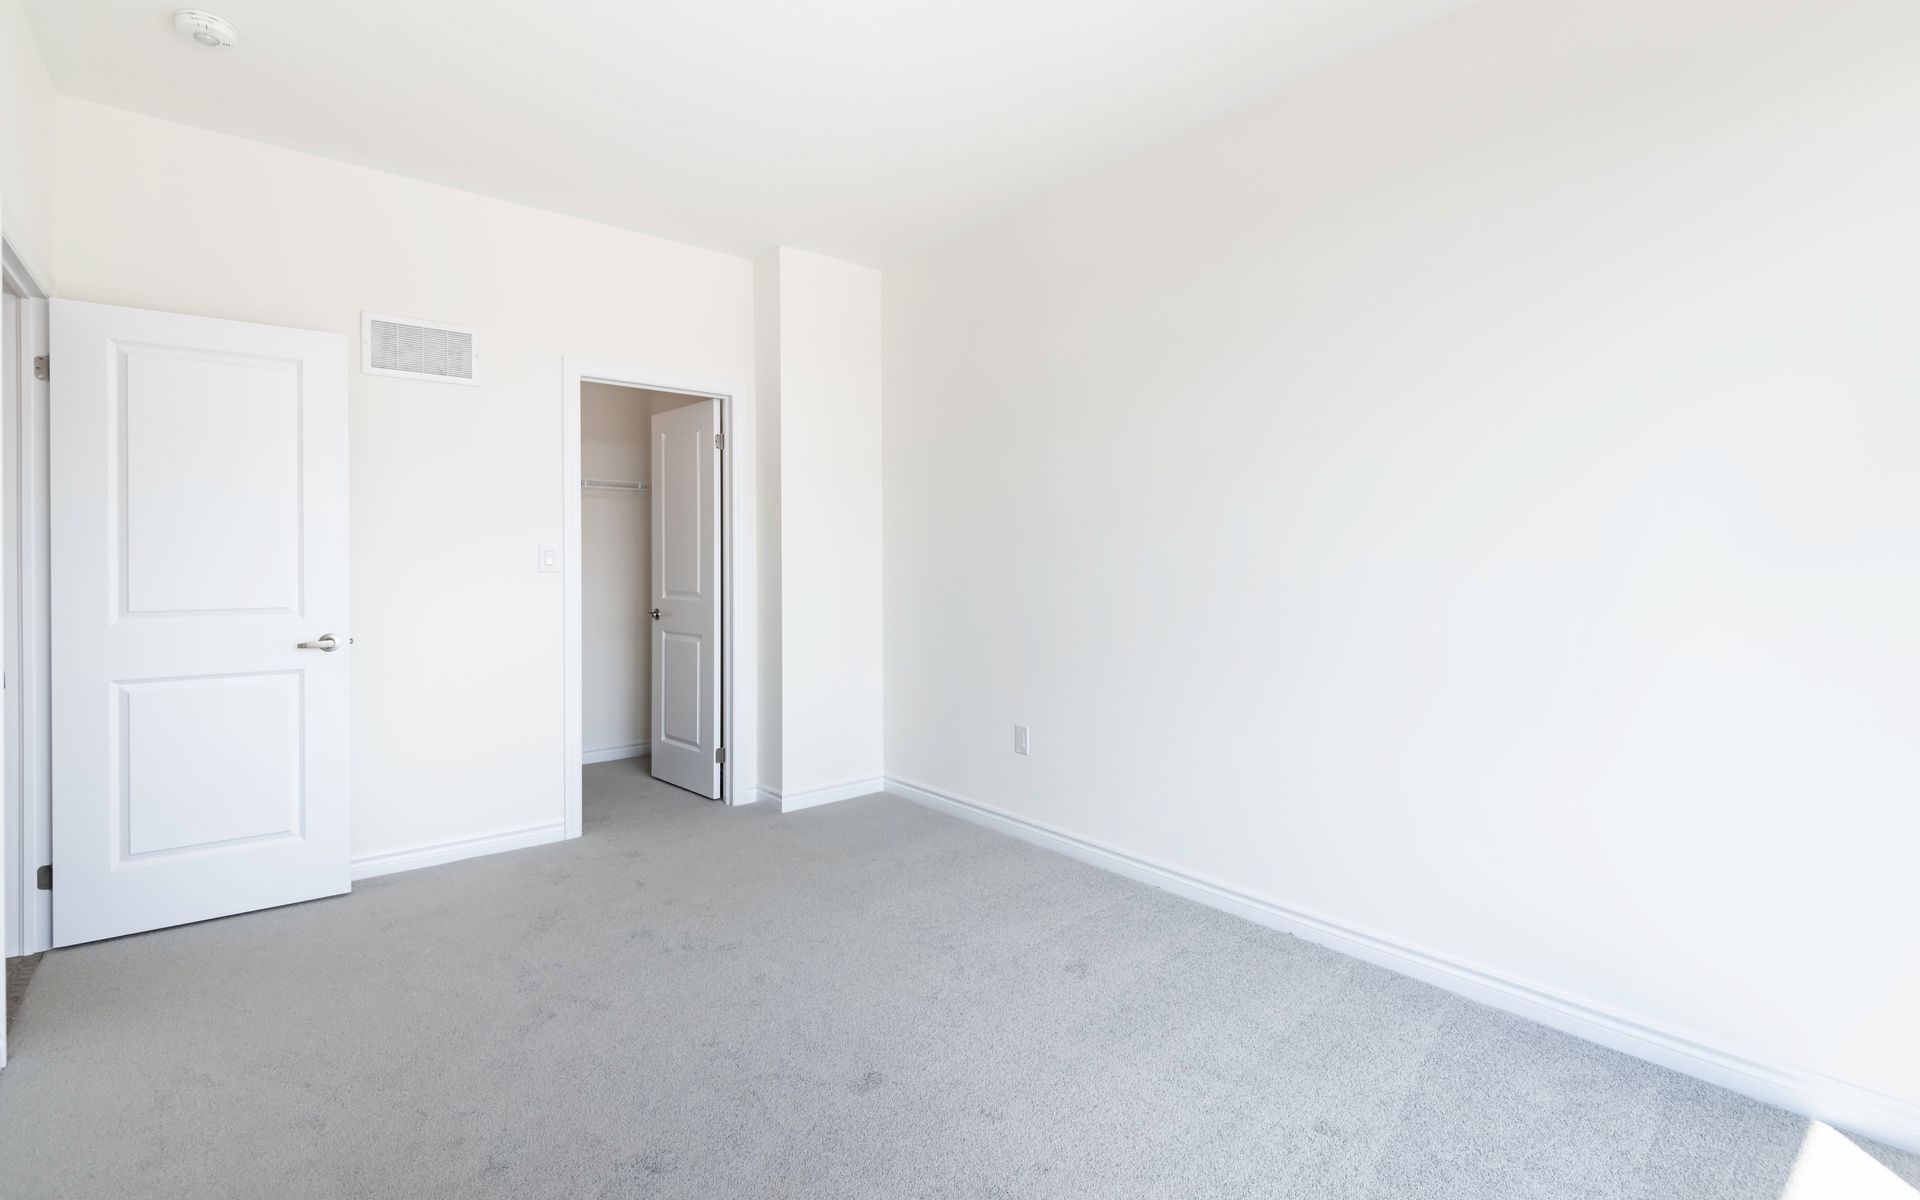 an empty bedroom with a carpeted floor and white walls .